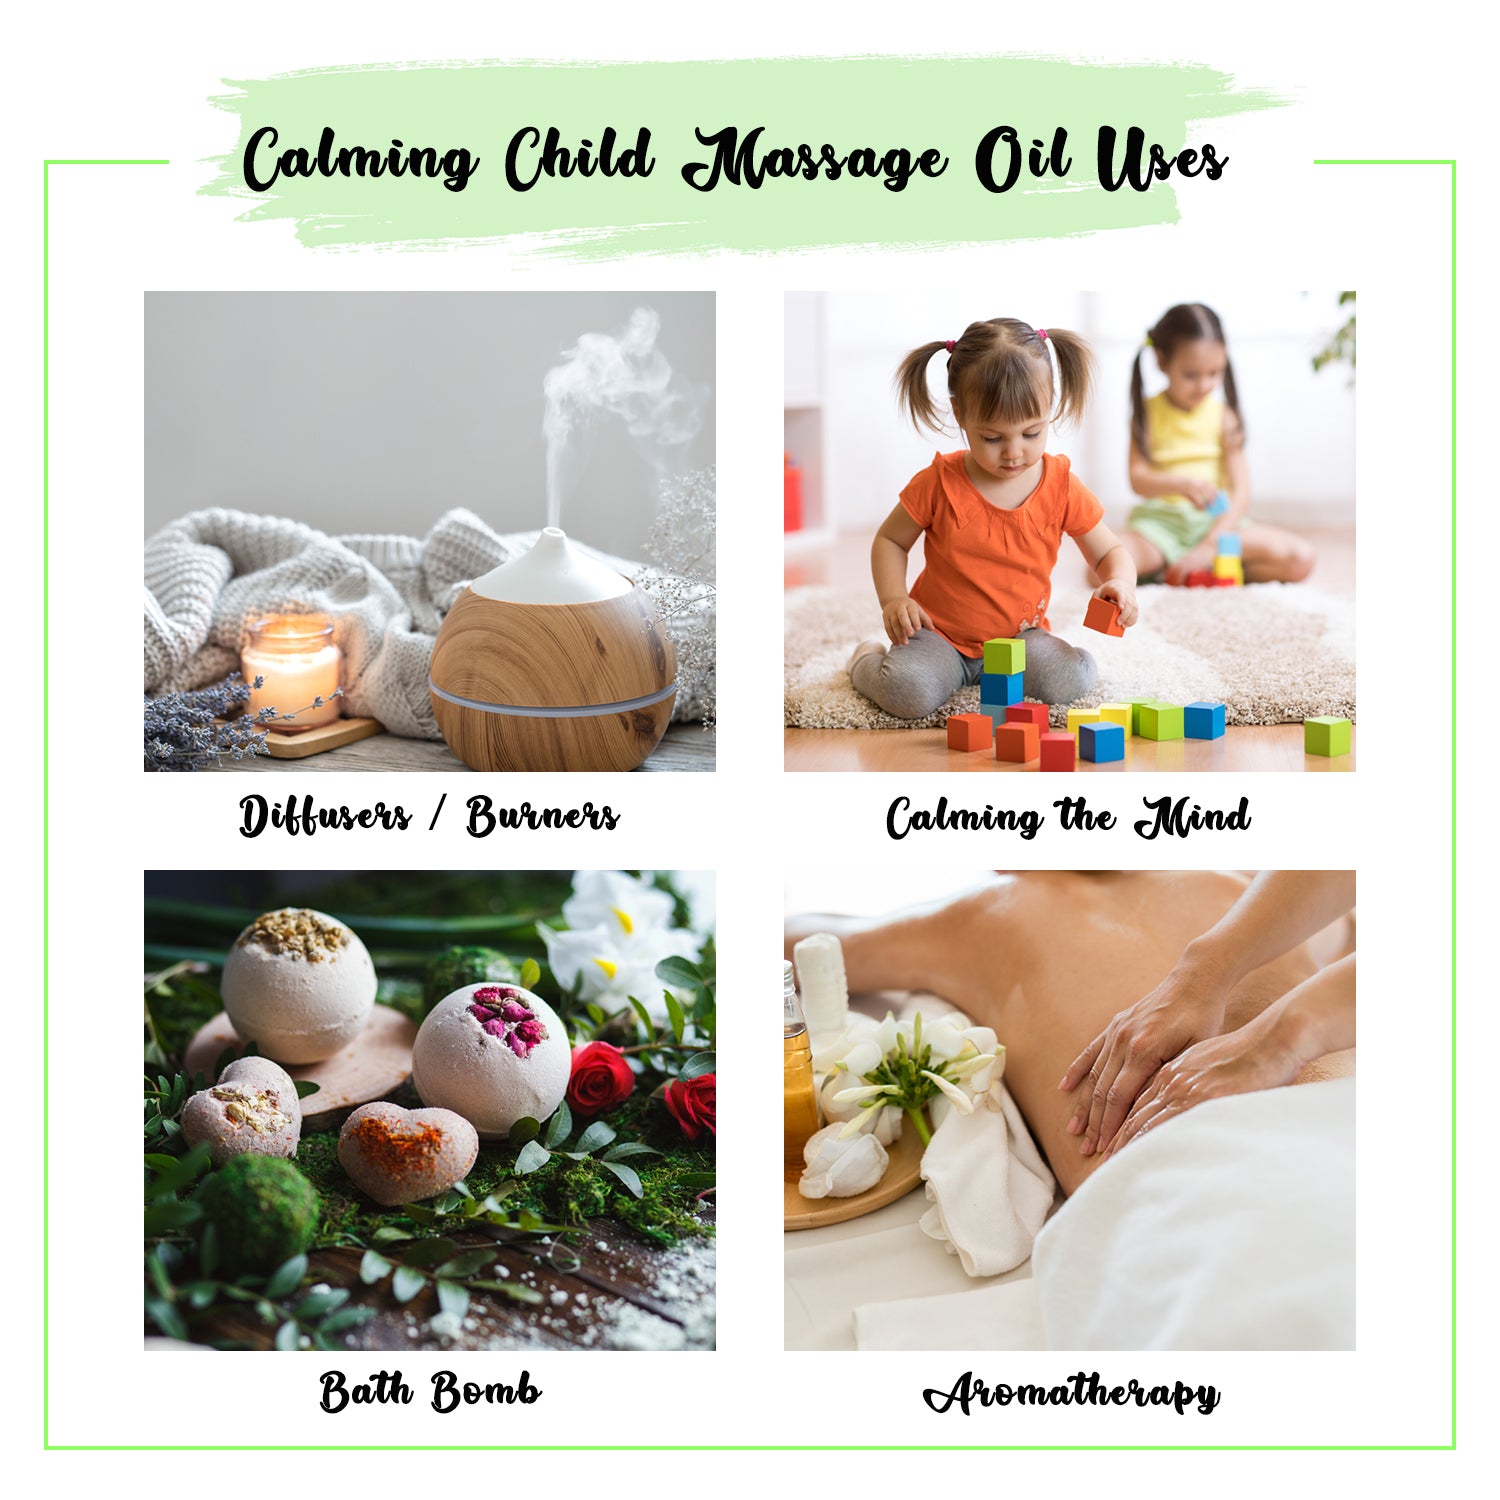 Baby Care Gift Kit - Baby Massage Oil + Child Calm